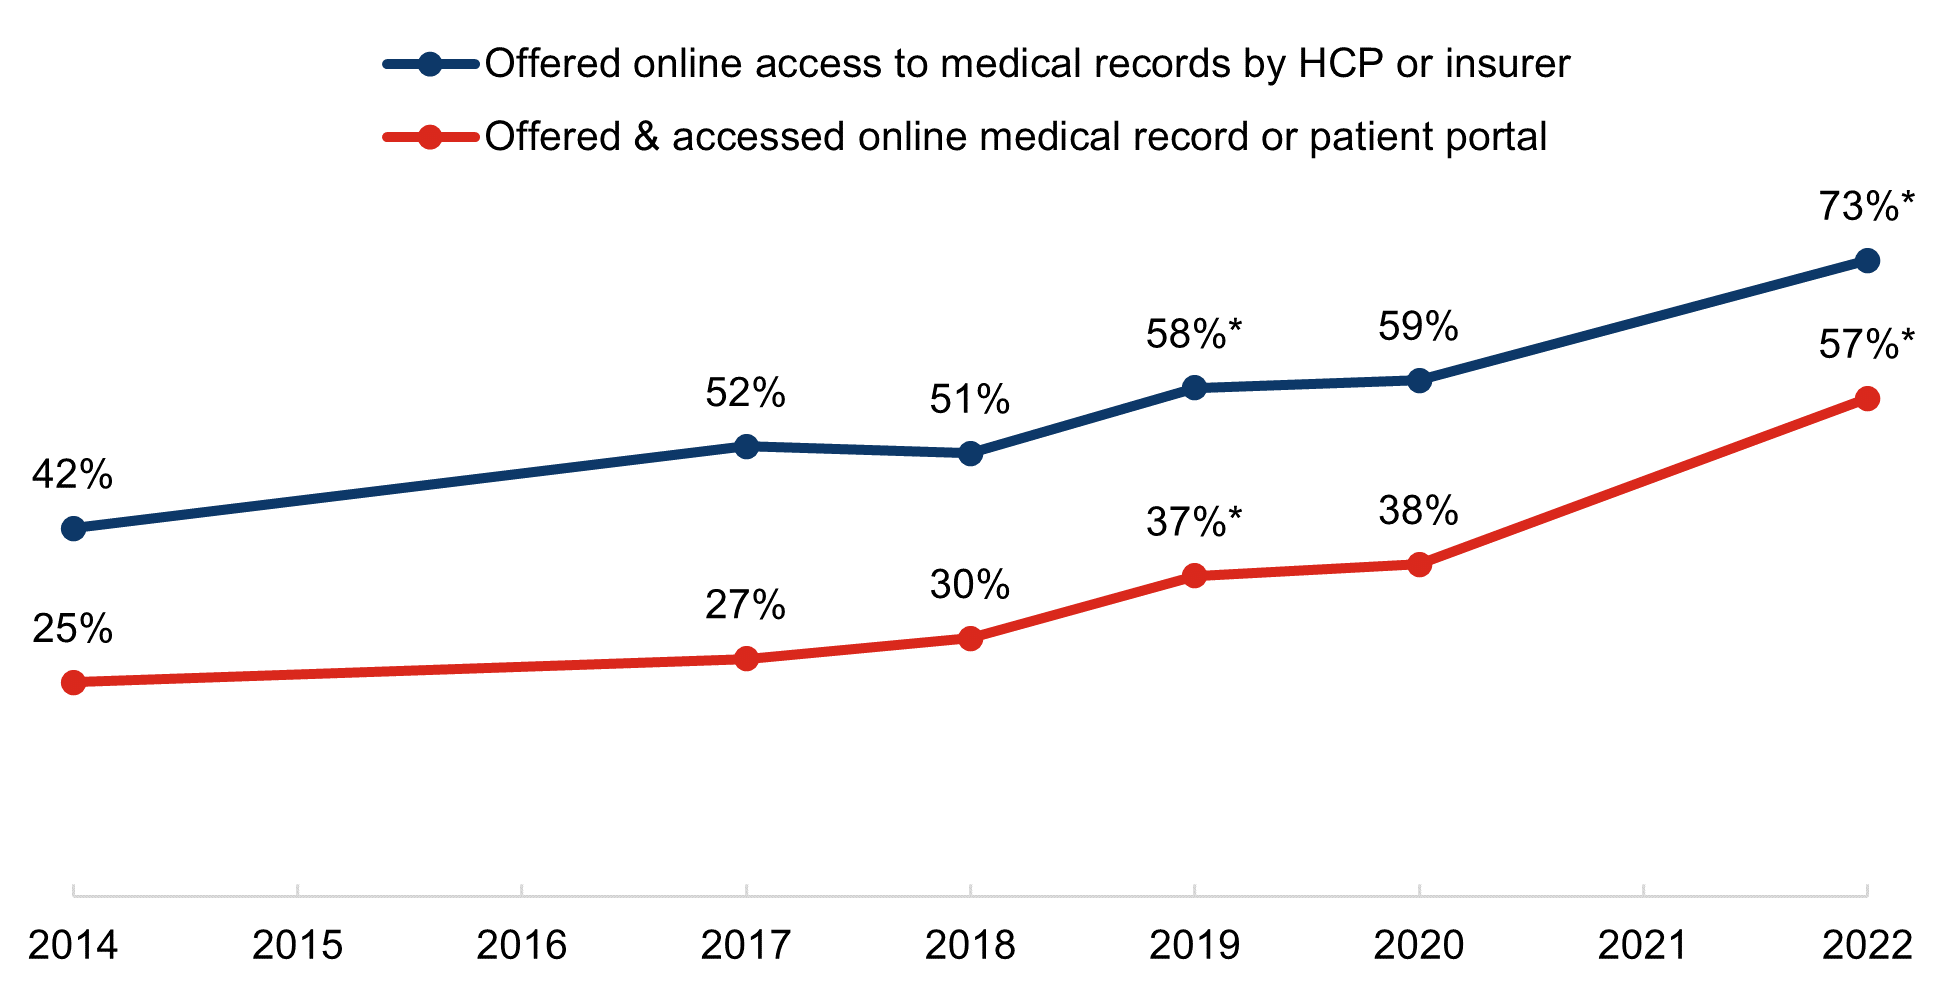 This figure contains a line chart showing the percent of individuals who were offered and who accessed their online medical record or patient portal across several years, with the years 2014-2022 displayed across the x-axis and the y-axis values representing the percent of individuals. Two lines showing trends across time are plotted, one representing the percent of individuals who were offered online access to medical records by their health care provider or insurer, and the second representing the percent of individuals who were offered and accessed their online medical records or patient portal. The graph shows that the percent of individuals who were offered access to their online medical records or patient portal was 42 percent in 2014, 52 percent in 2017, 51 percent in 2018, 58 percent in 2019 (representing a statistically significant increase from 2018), 59 percent in 2020, and 73 percent in 2022 (representing a statistically significant increase from 2020). The other line displayed on the chart shows that the percent of individuals who were offered and accessed their online medical records or patient portal was 25 percent in 2014, 27 percent in 2017, 30 percent in 2018, 37 percent in 2019 (representing a statistically significant increase from 2018), 38 percent in 2020, and 57 percent in 2022 (representing a statistically significant increase from 2020).  